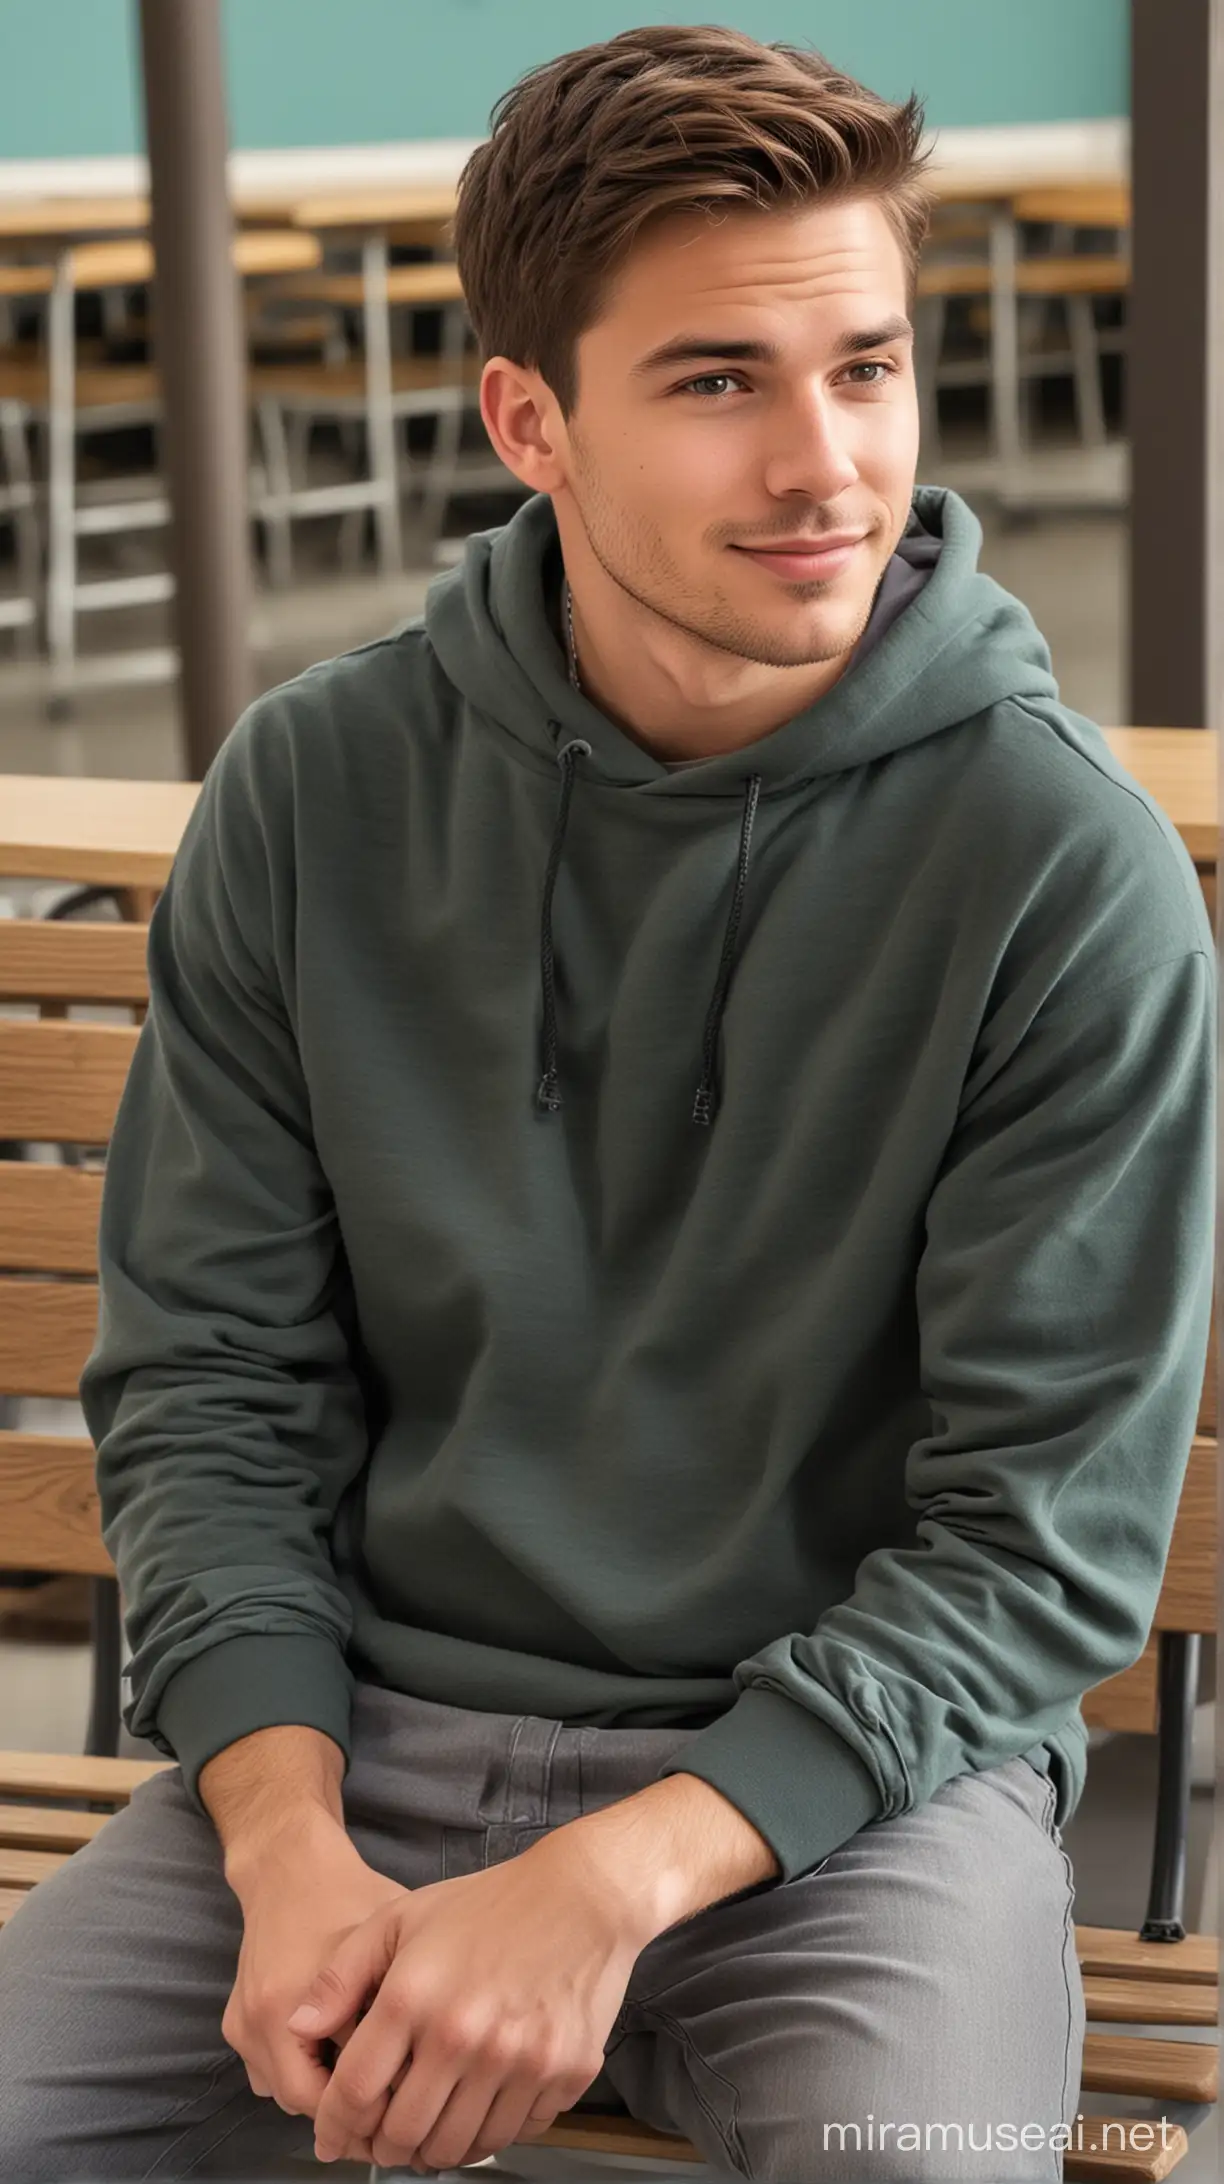 Handsome Guy Relaxing on Cafeteria Bench